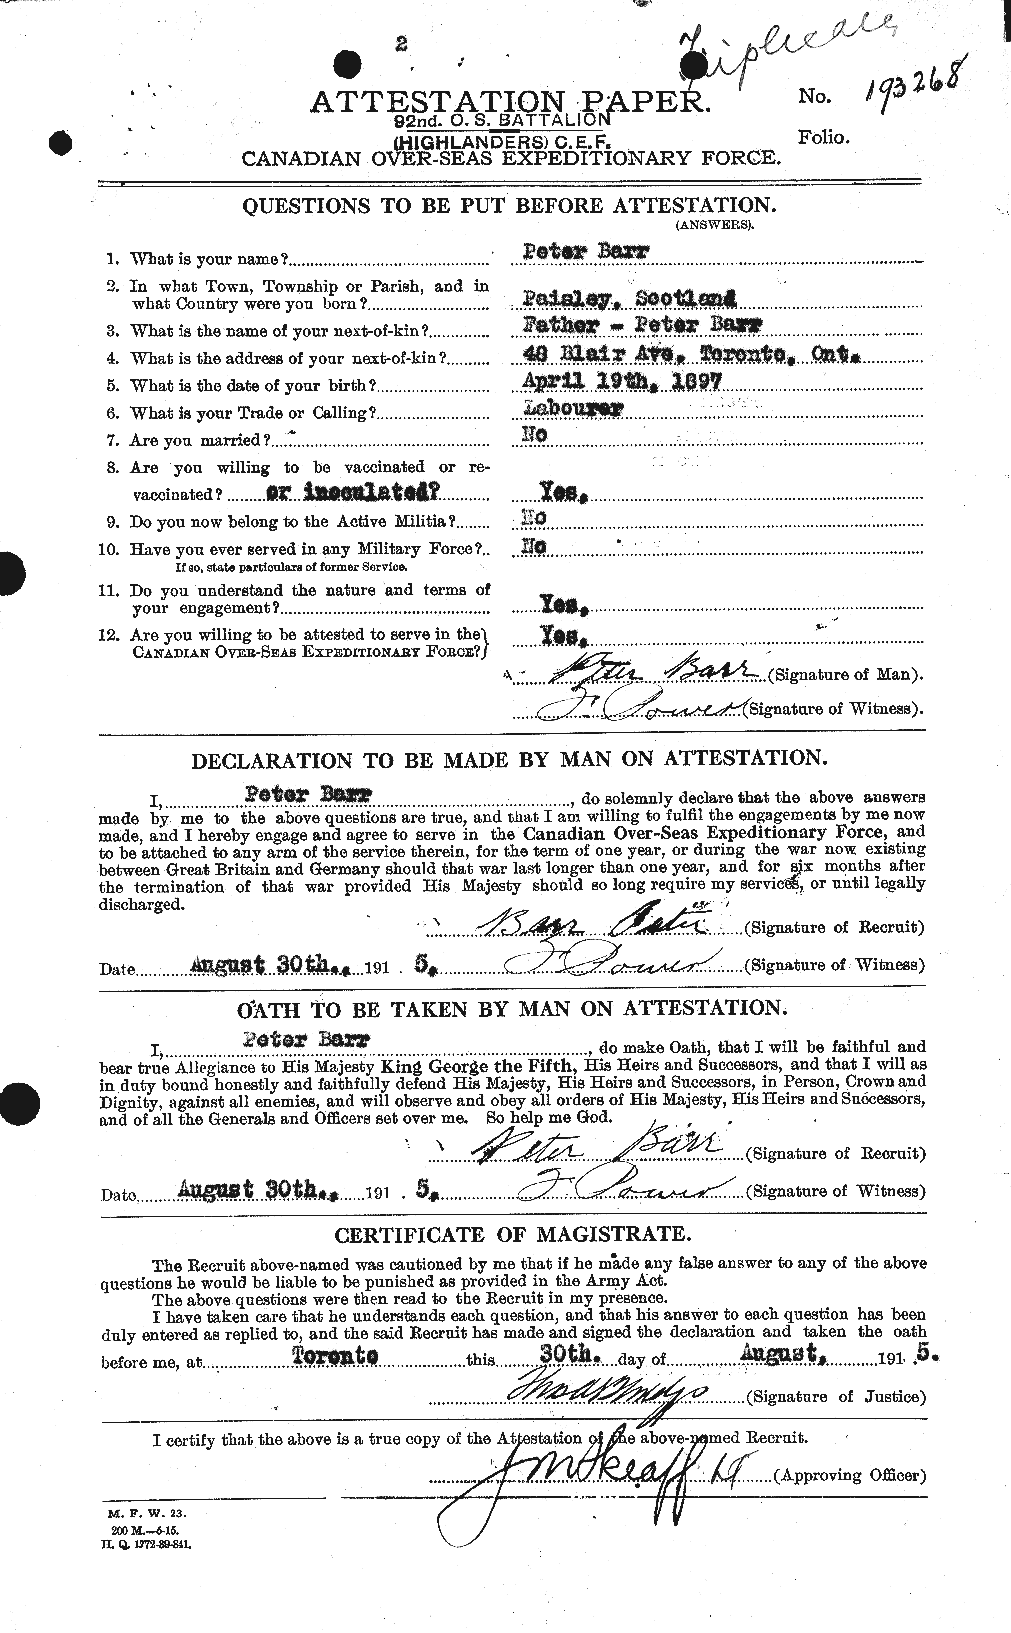 Personnel Records of the First World War - CEF 227892a